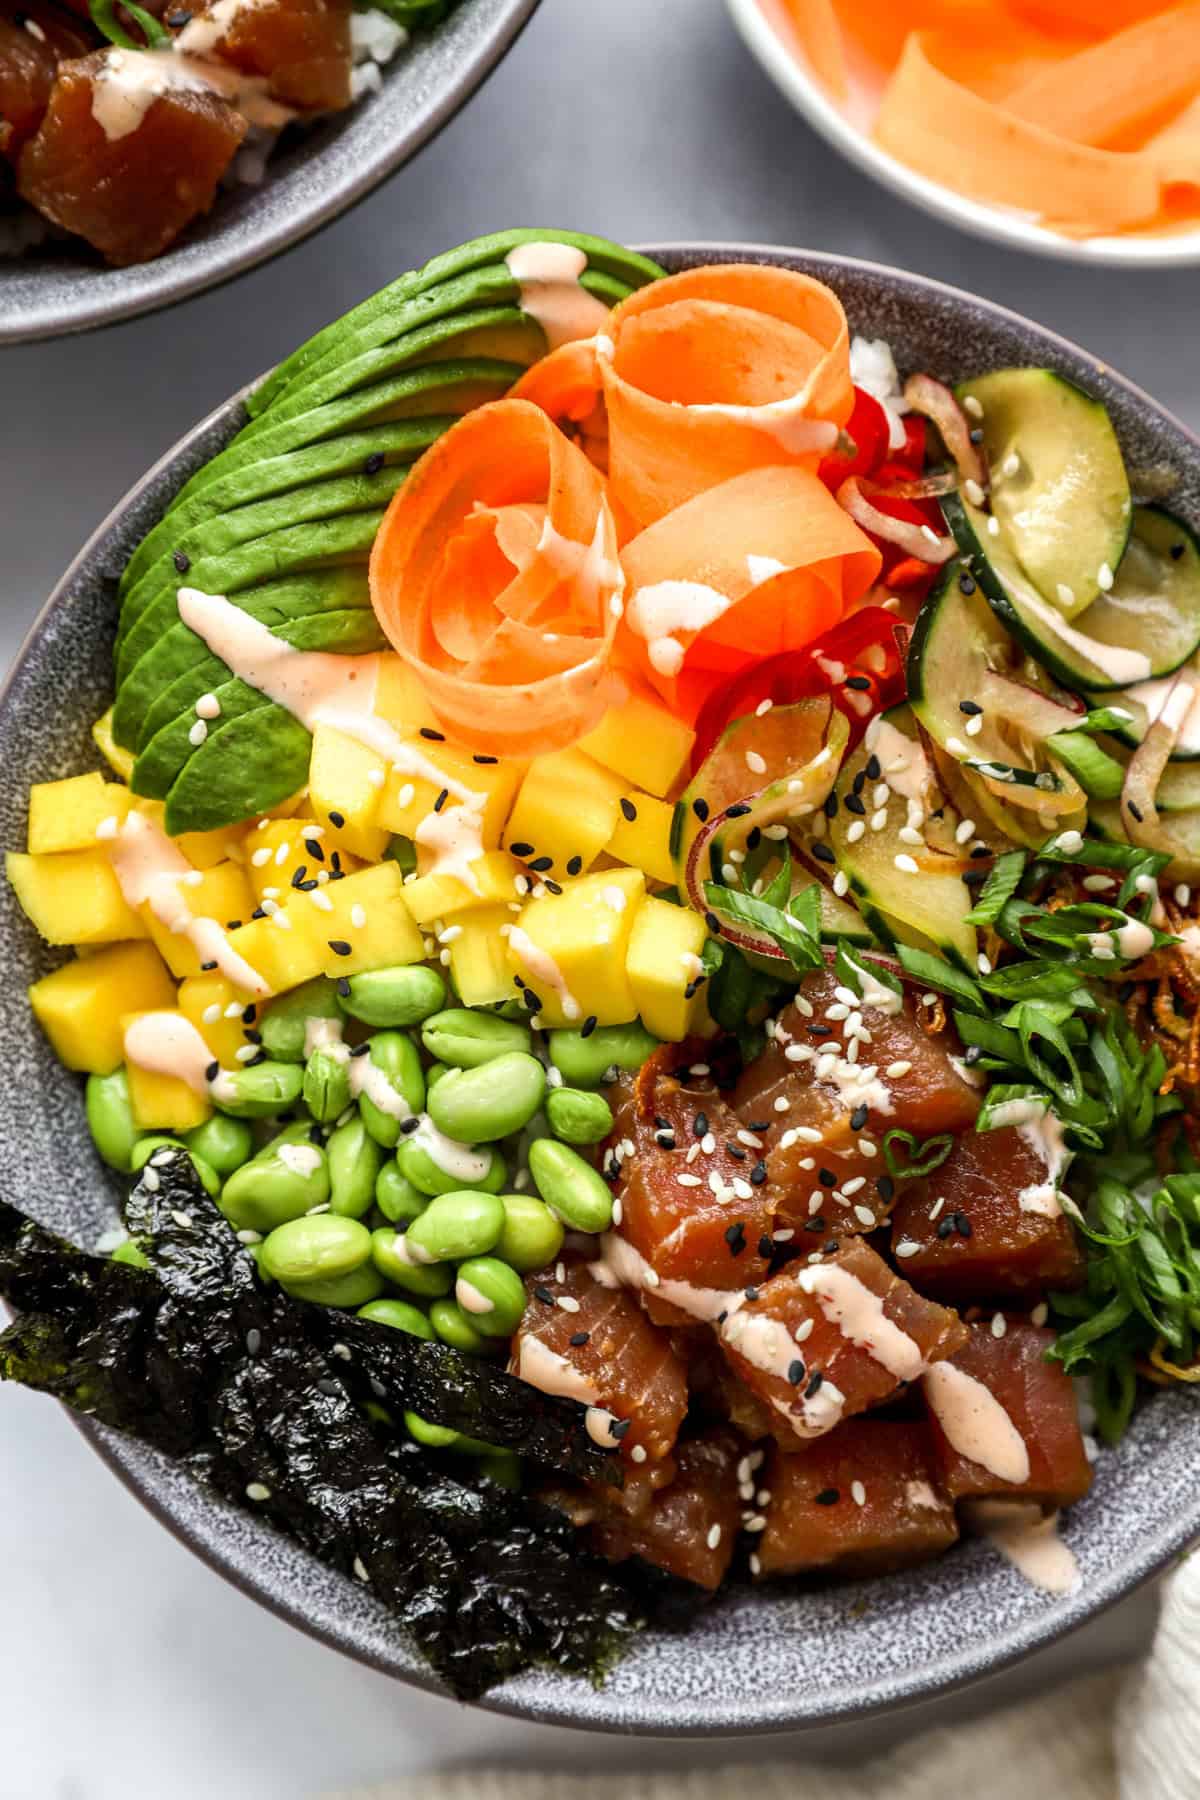 The photo above is a close-up of a poke sushi bowl.